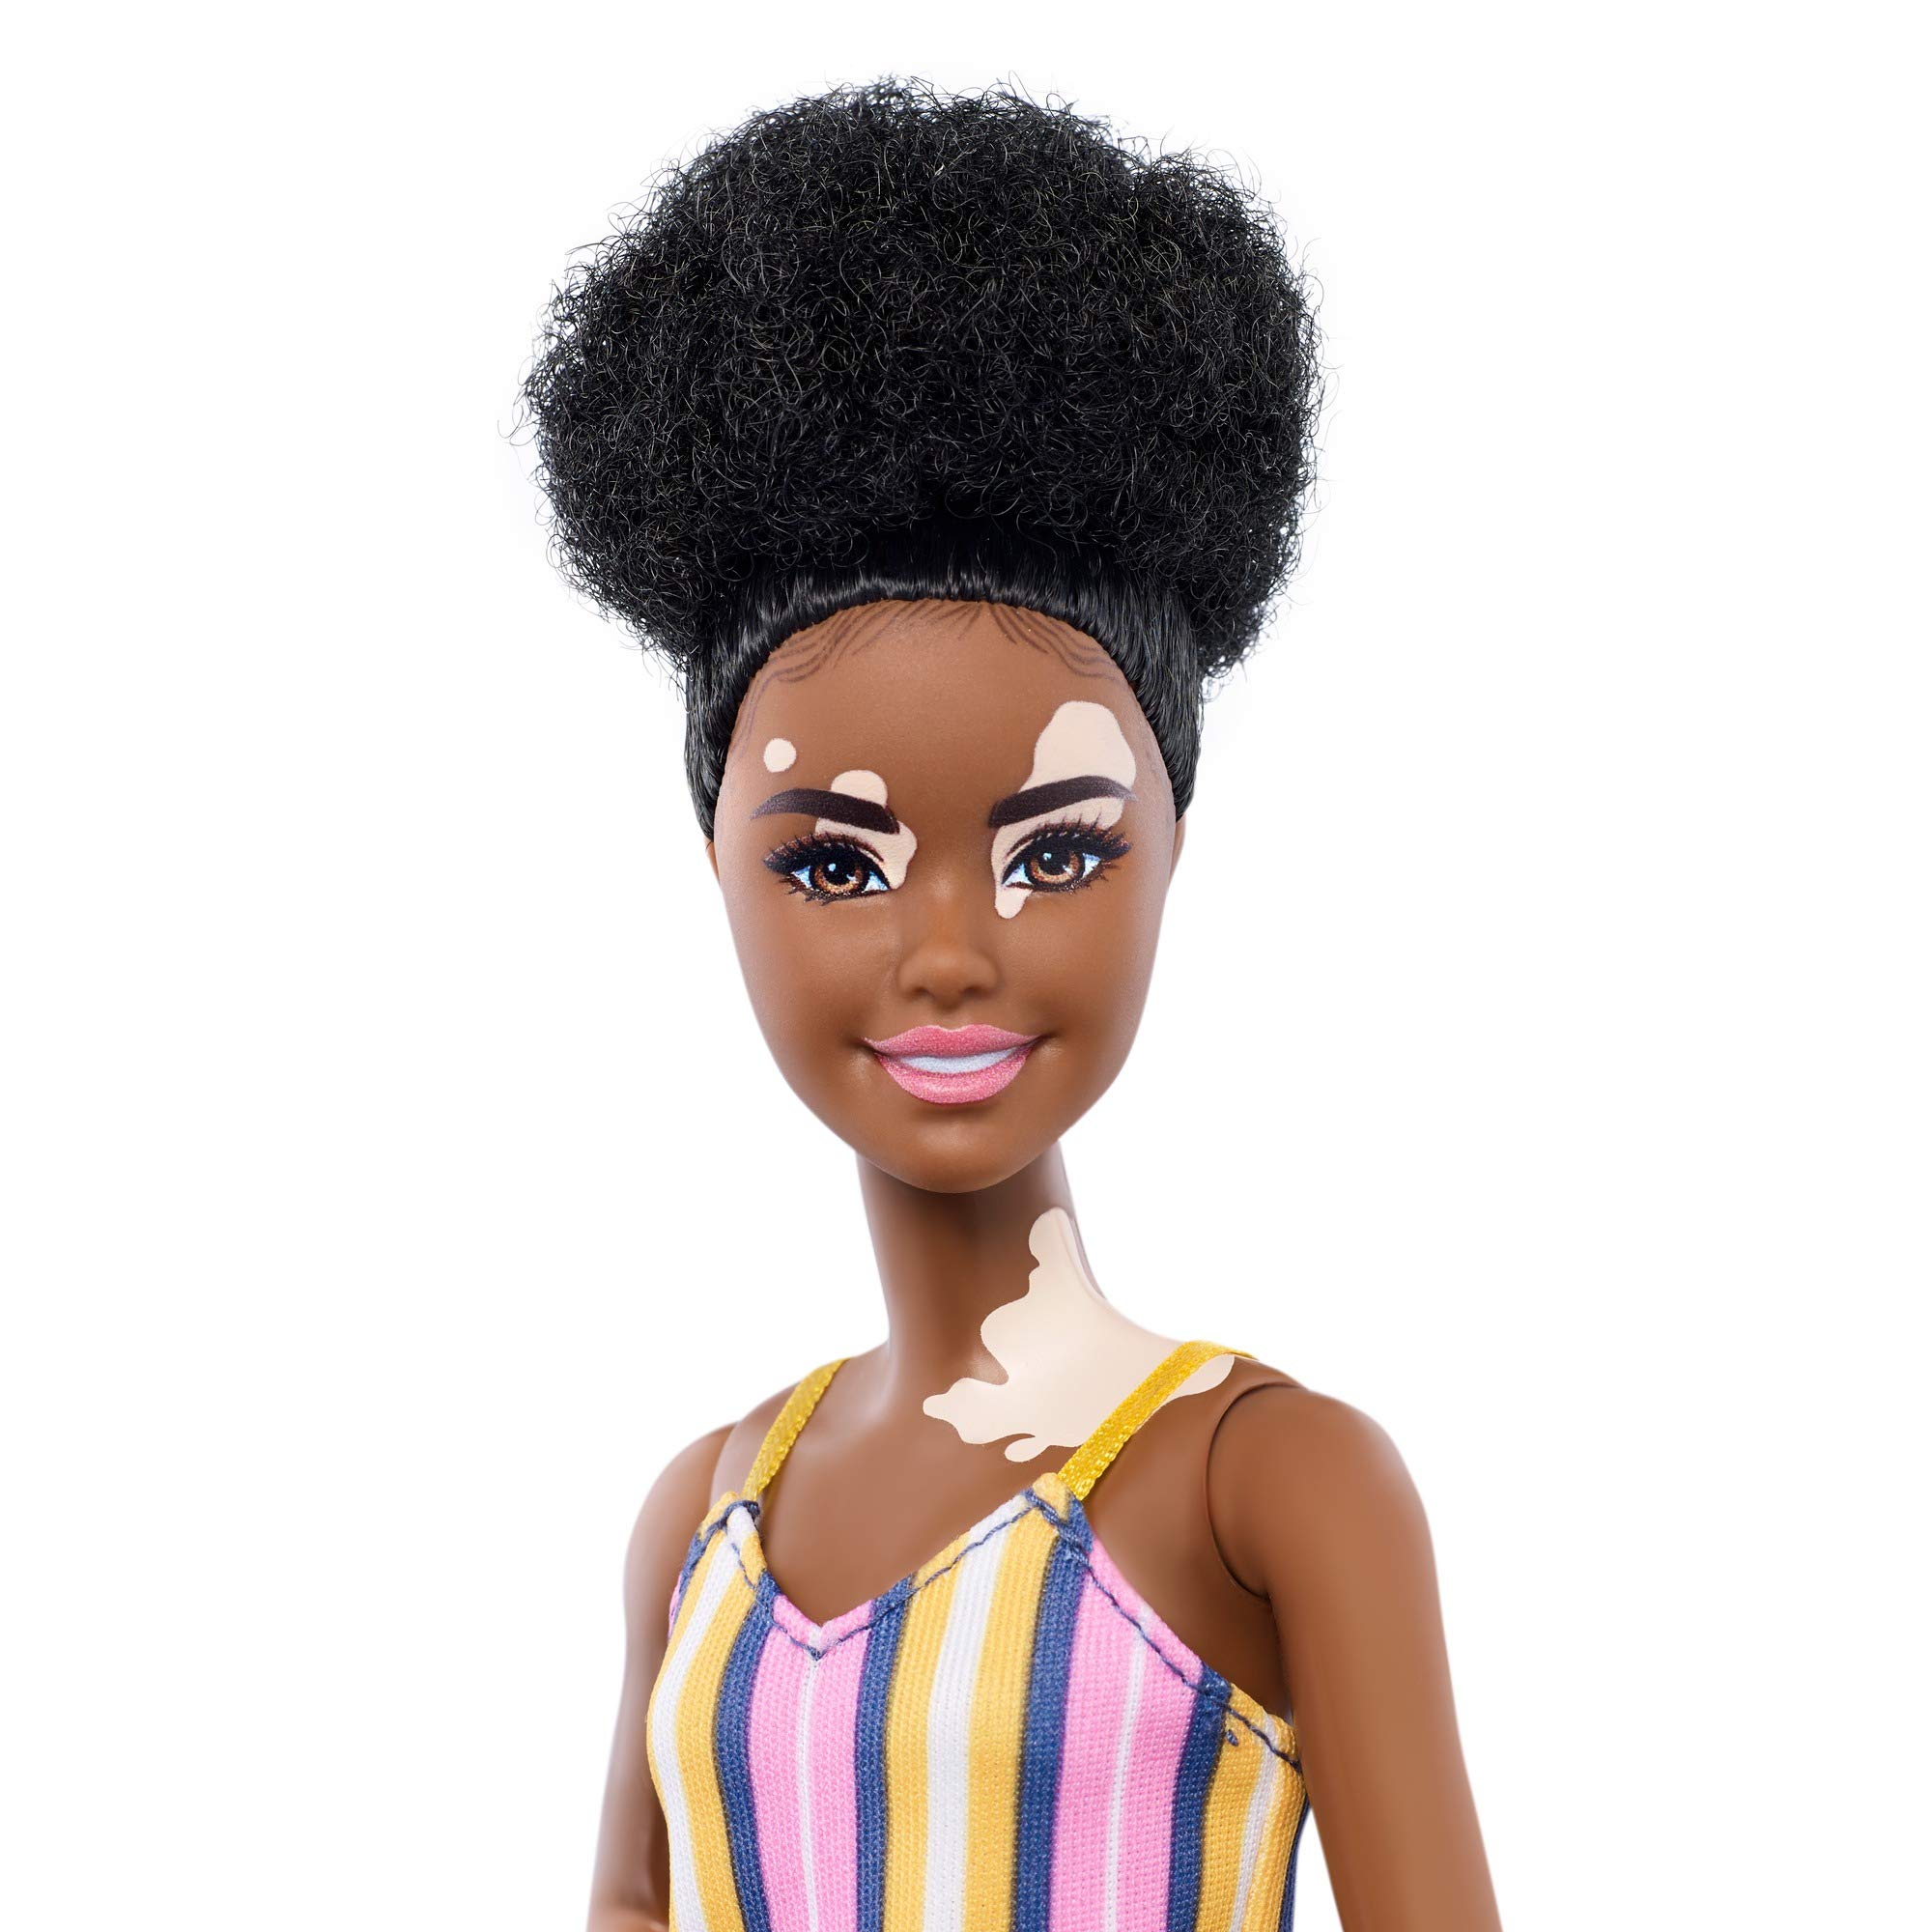 Barbie Fashionistas Doll with Vitiligo and Curly Brunette Hair Wearing Striped Dress and Accessories, for 3 to 8 Year Olds​